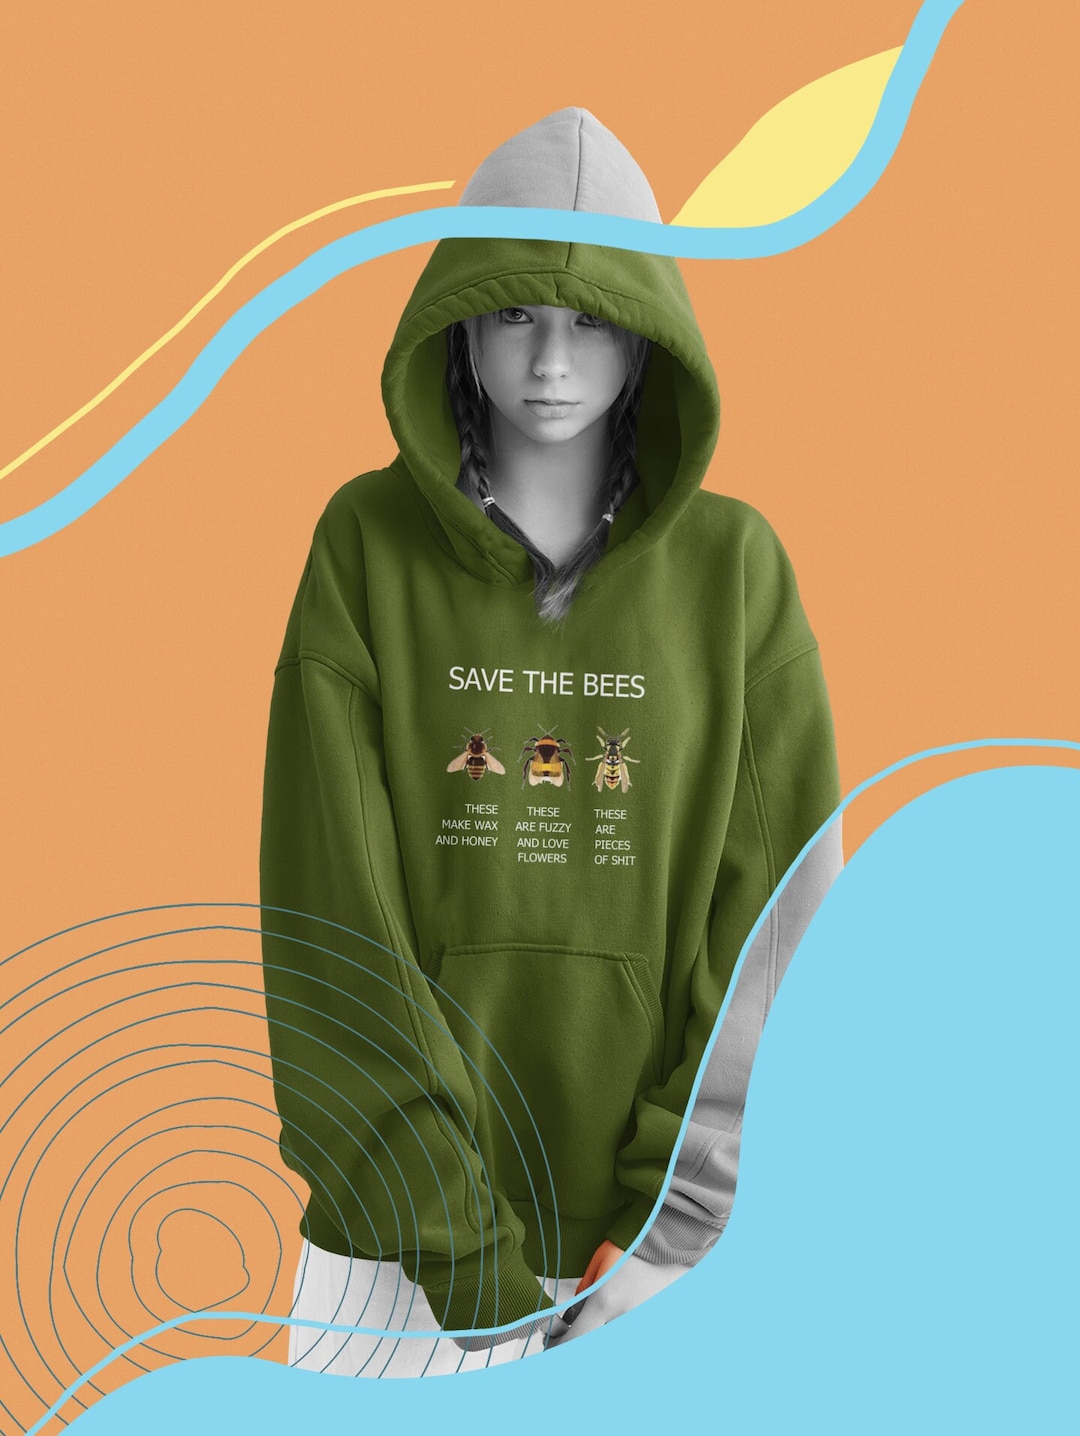 Save the Bees They Give Us Honey Heavy Hooded Sweatshirt - Etsy